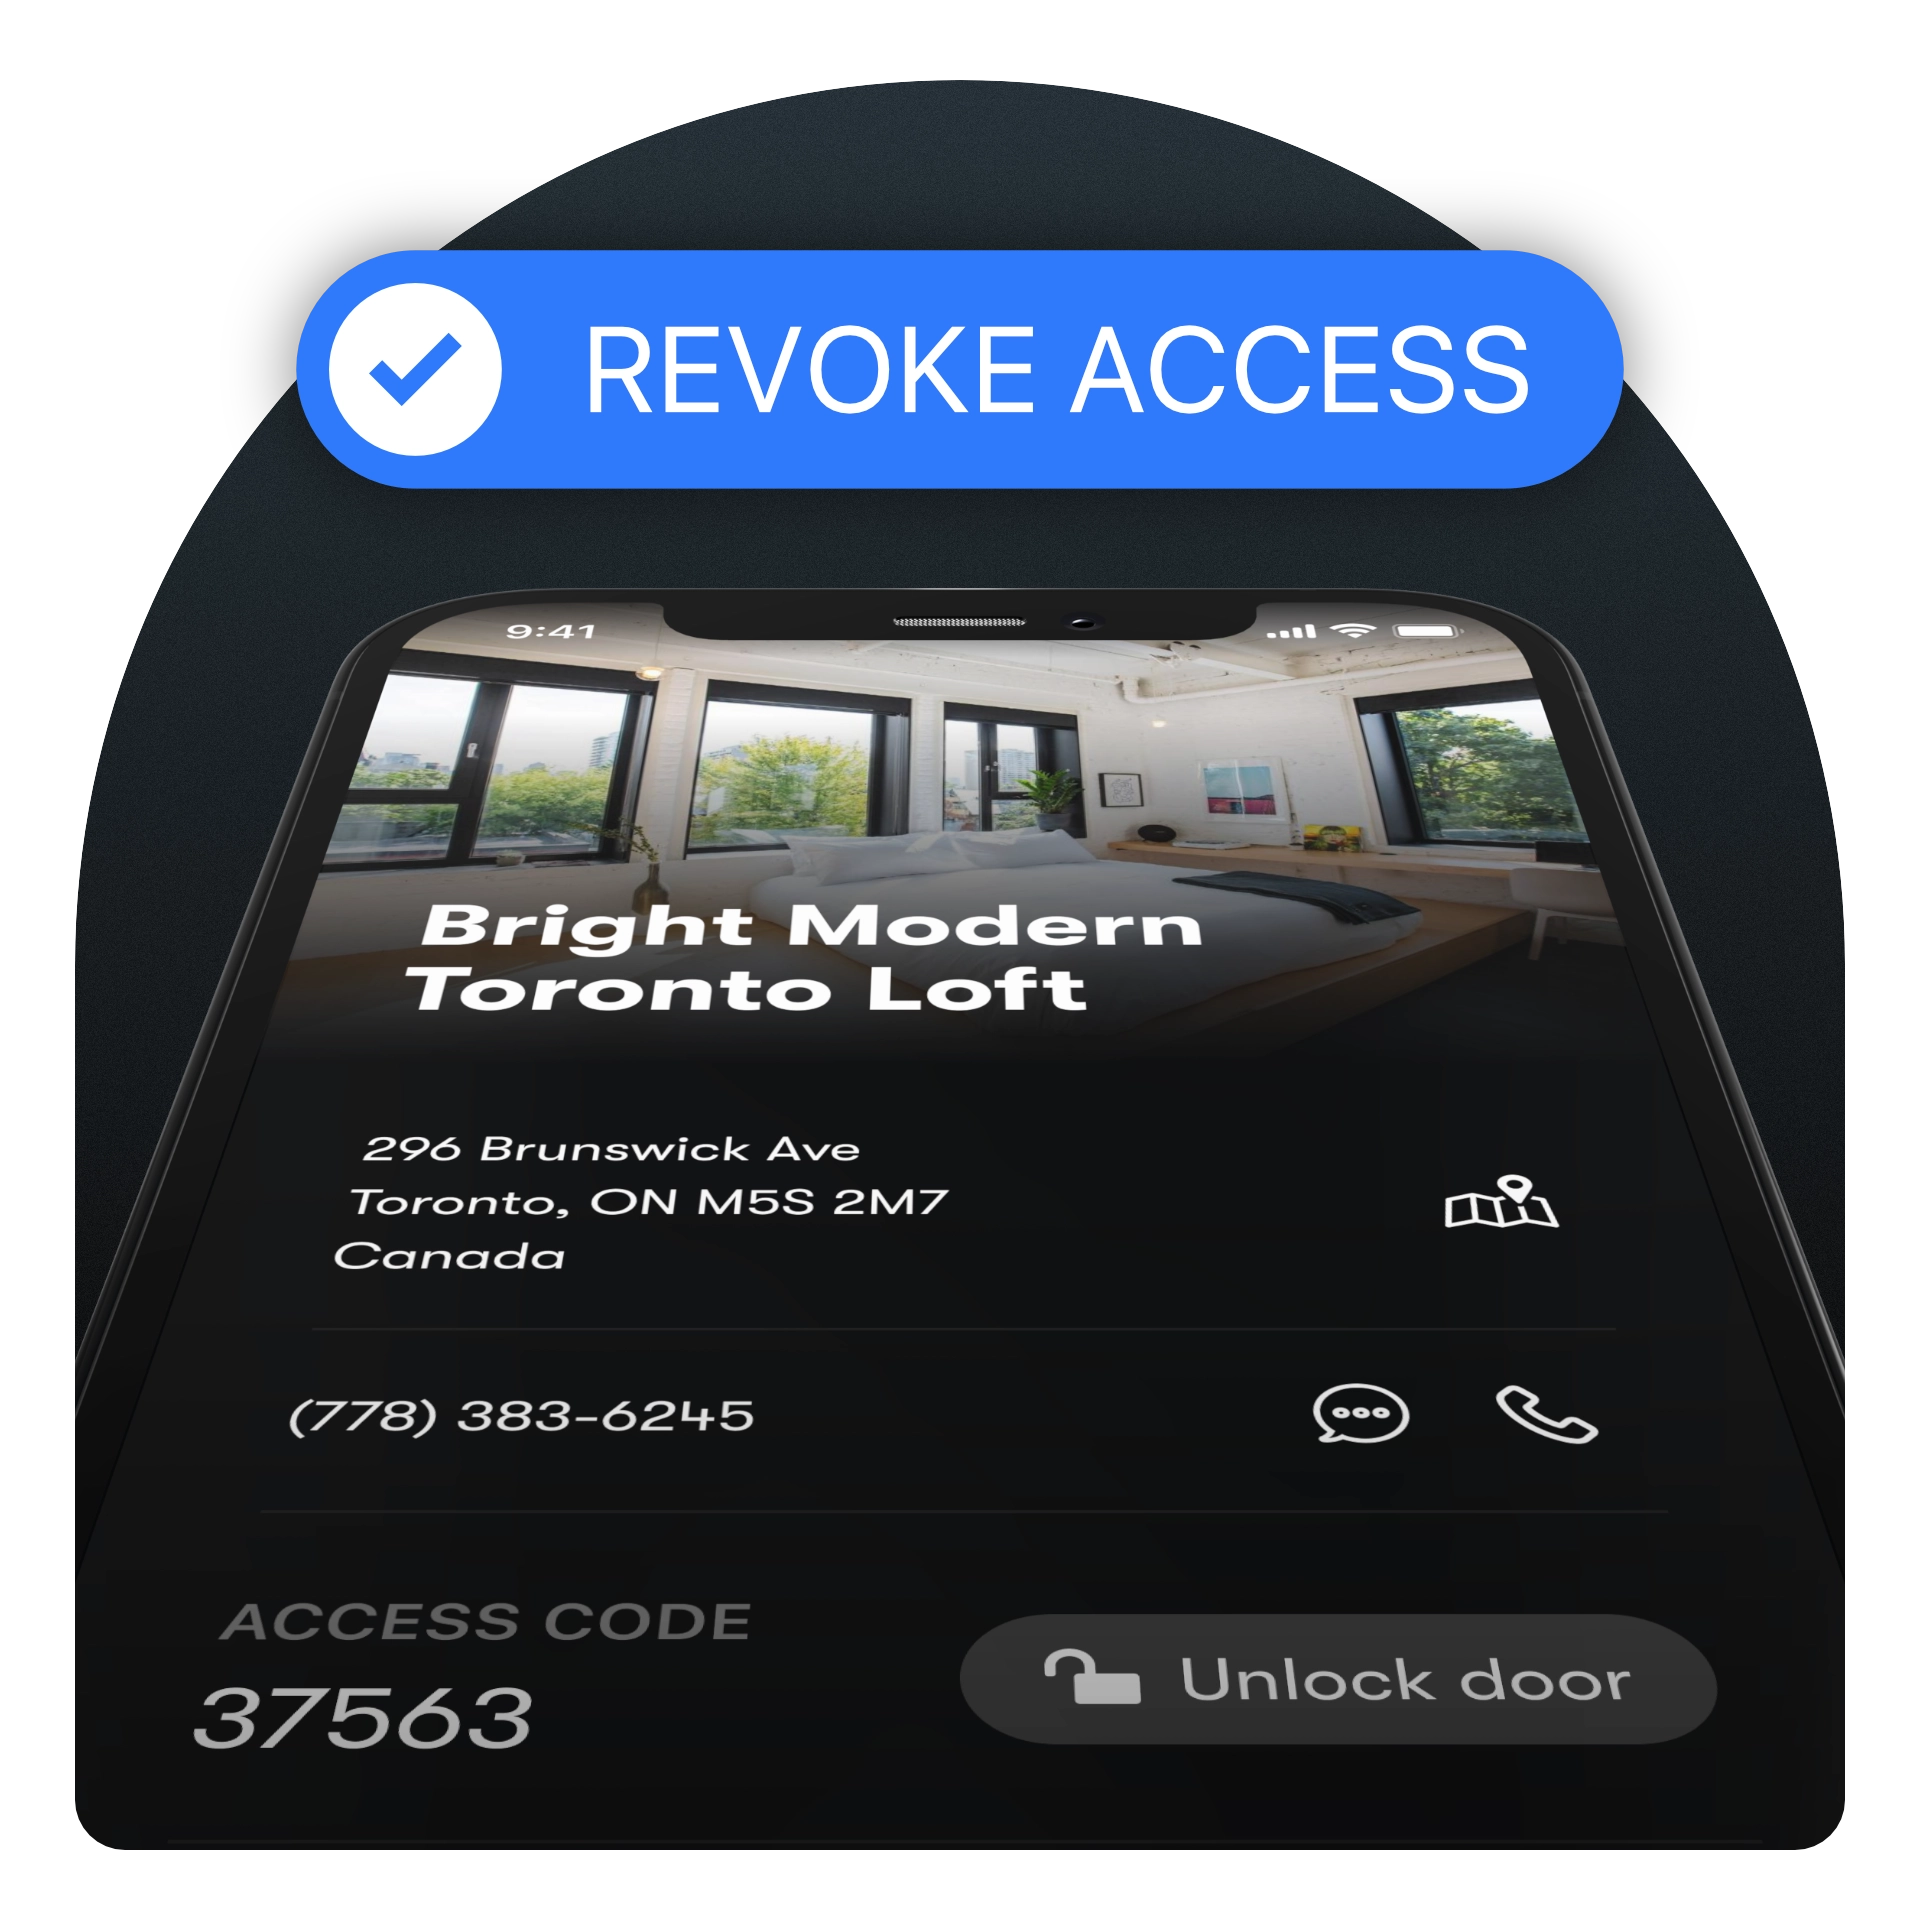 Revoke access to your property even after the verification approval